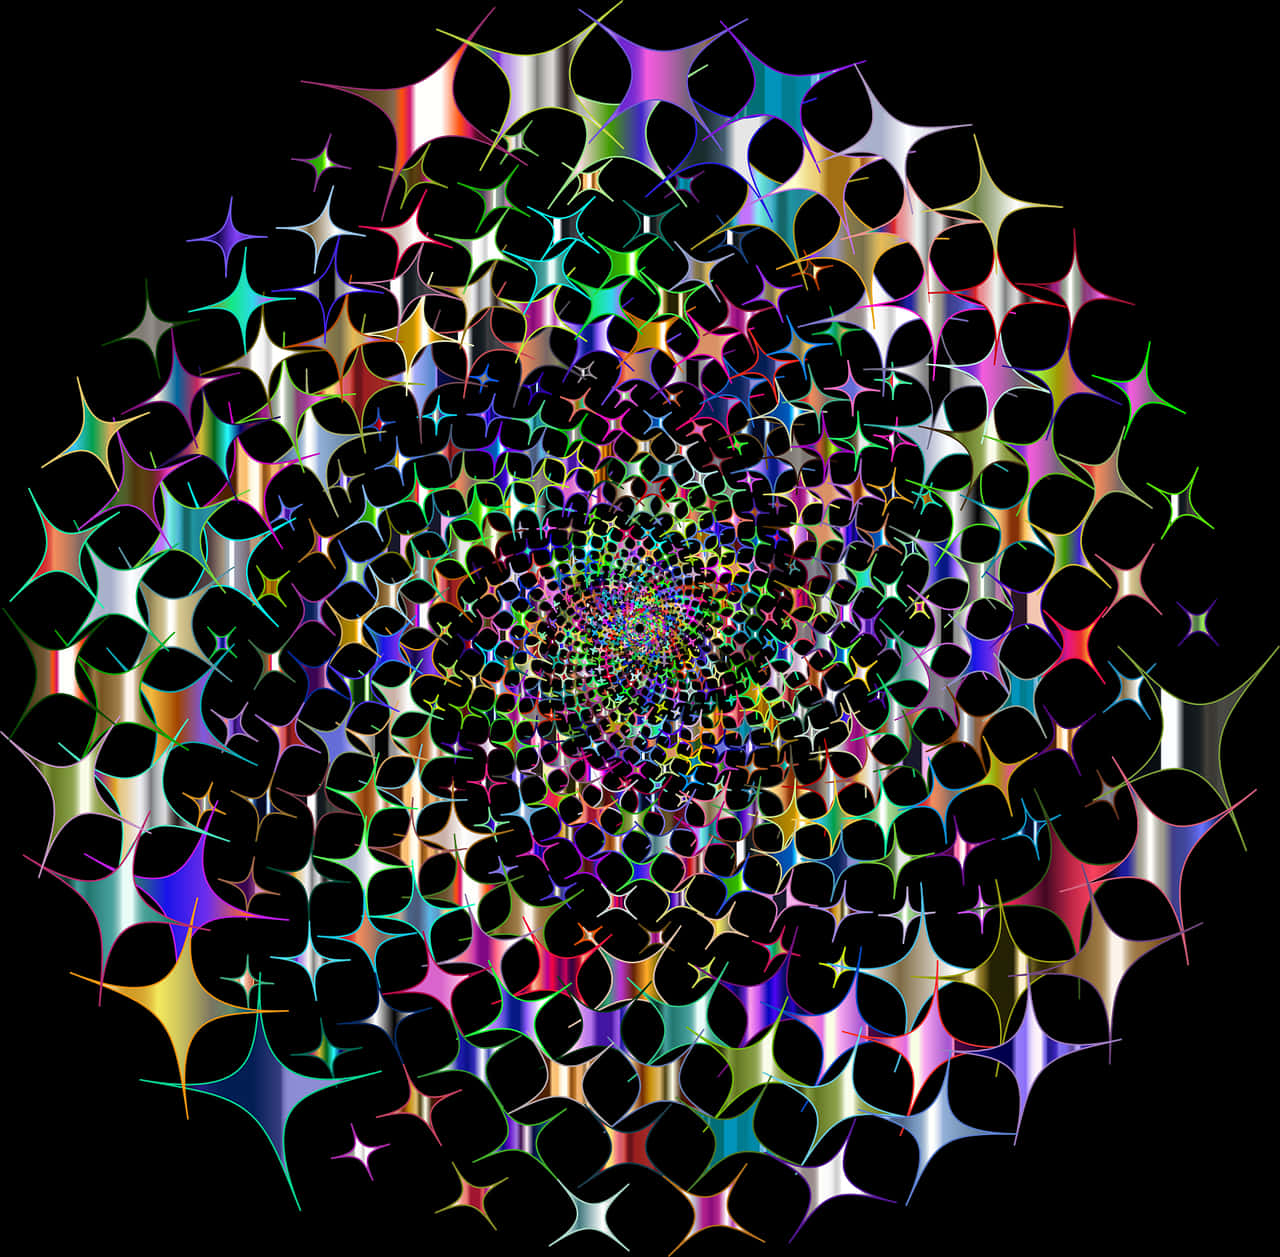 A Spiral Of Colorful Stars